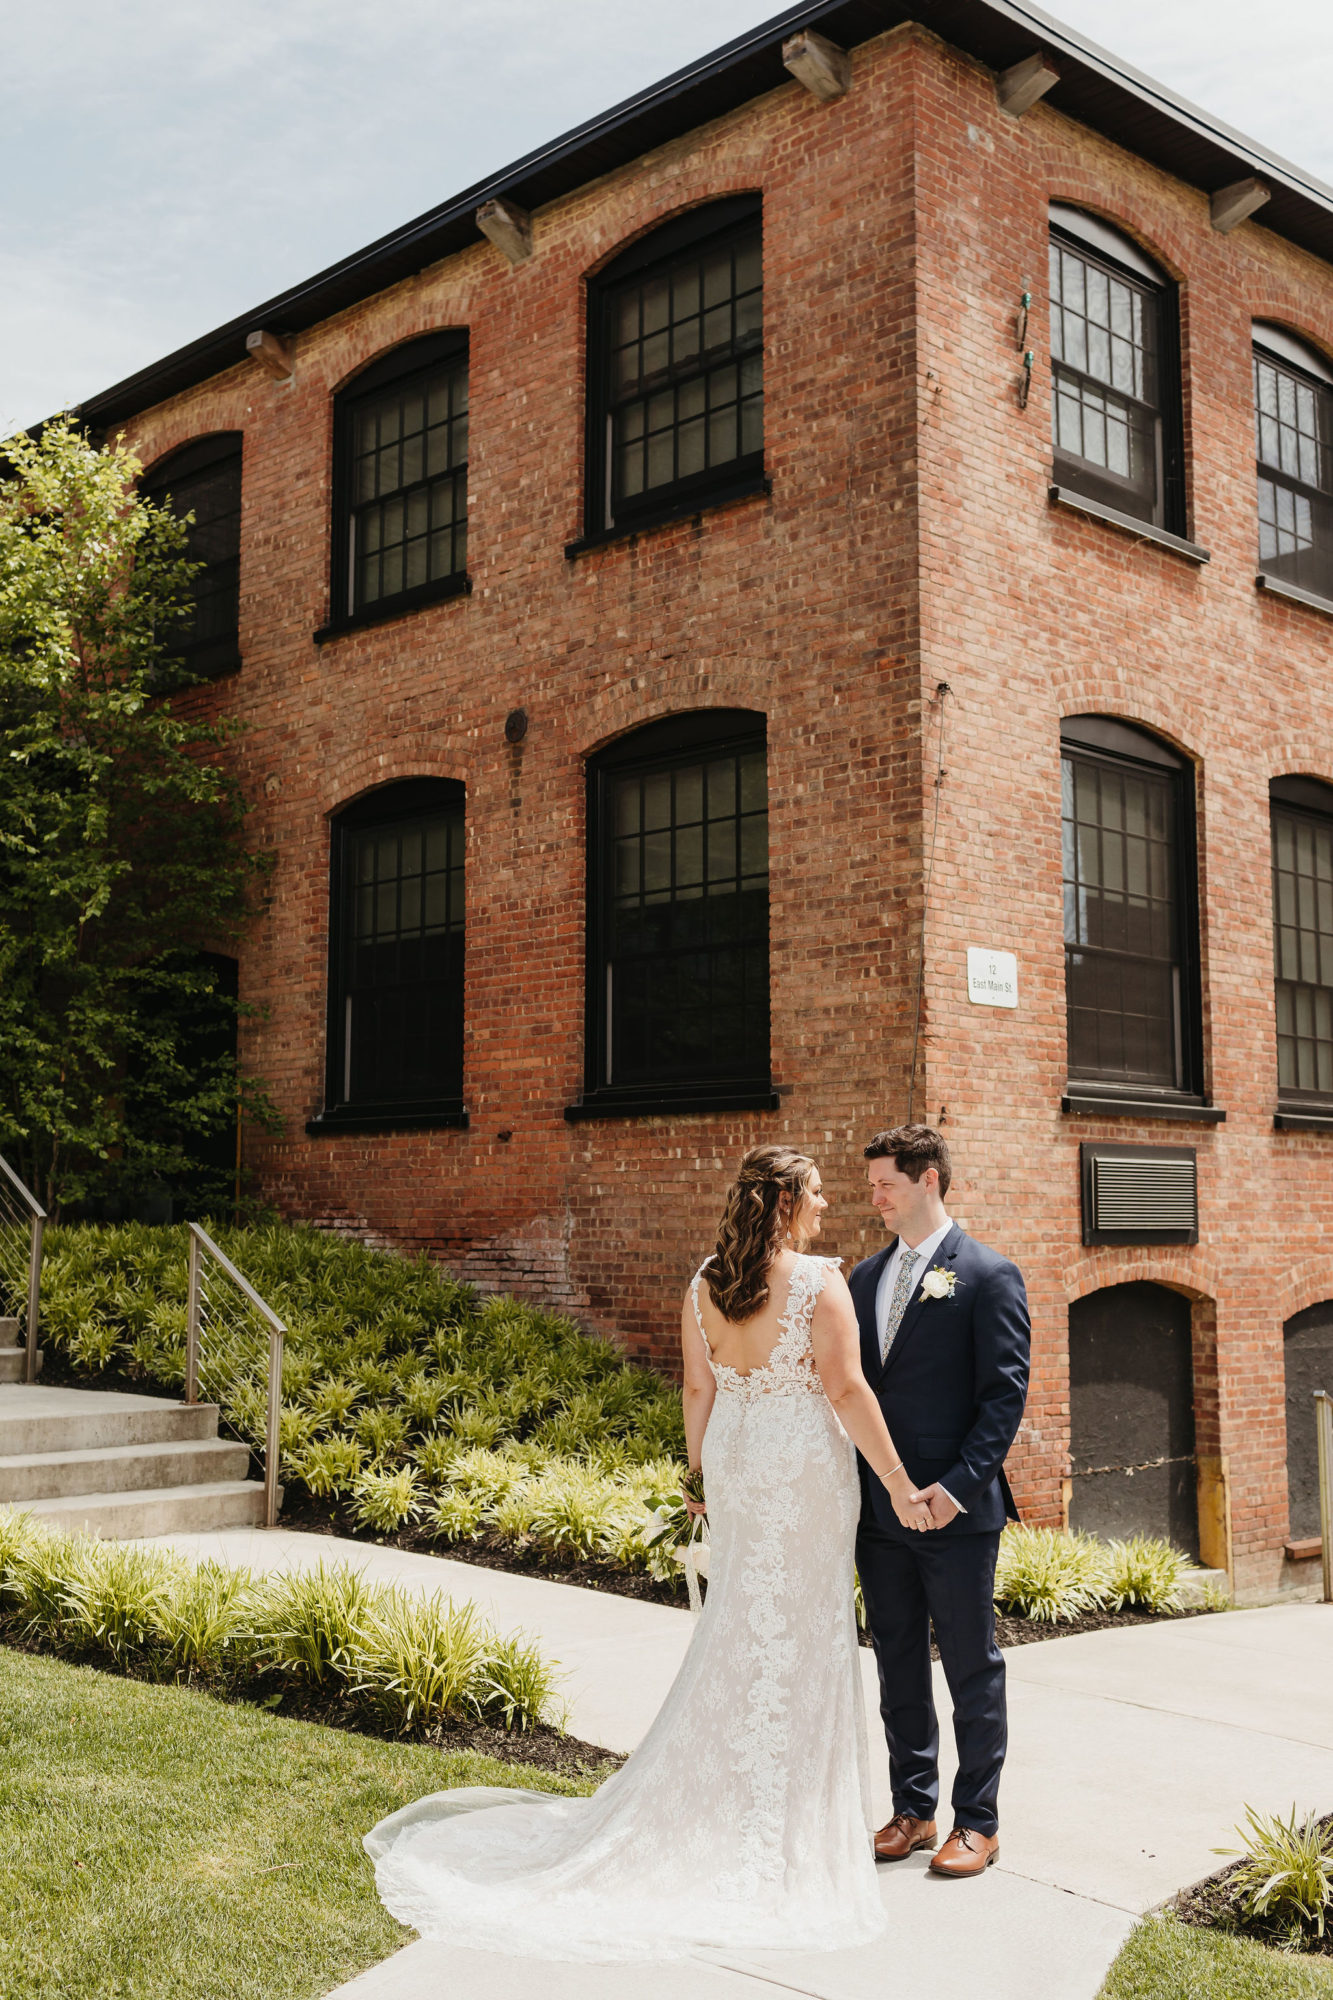 dusty blue wedding, romantic wedding decor, Industrial wedding, the roundhouse, hudson valley photographer, wedding inspiration, wedding photographer, hudson valley wedding, dusty blue bridesmaid dress, couples portraits 